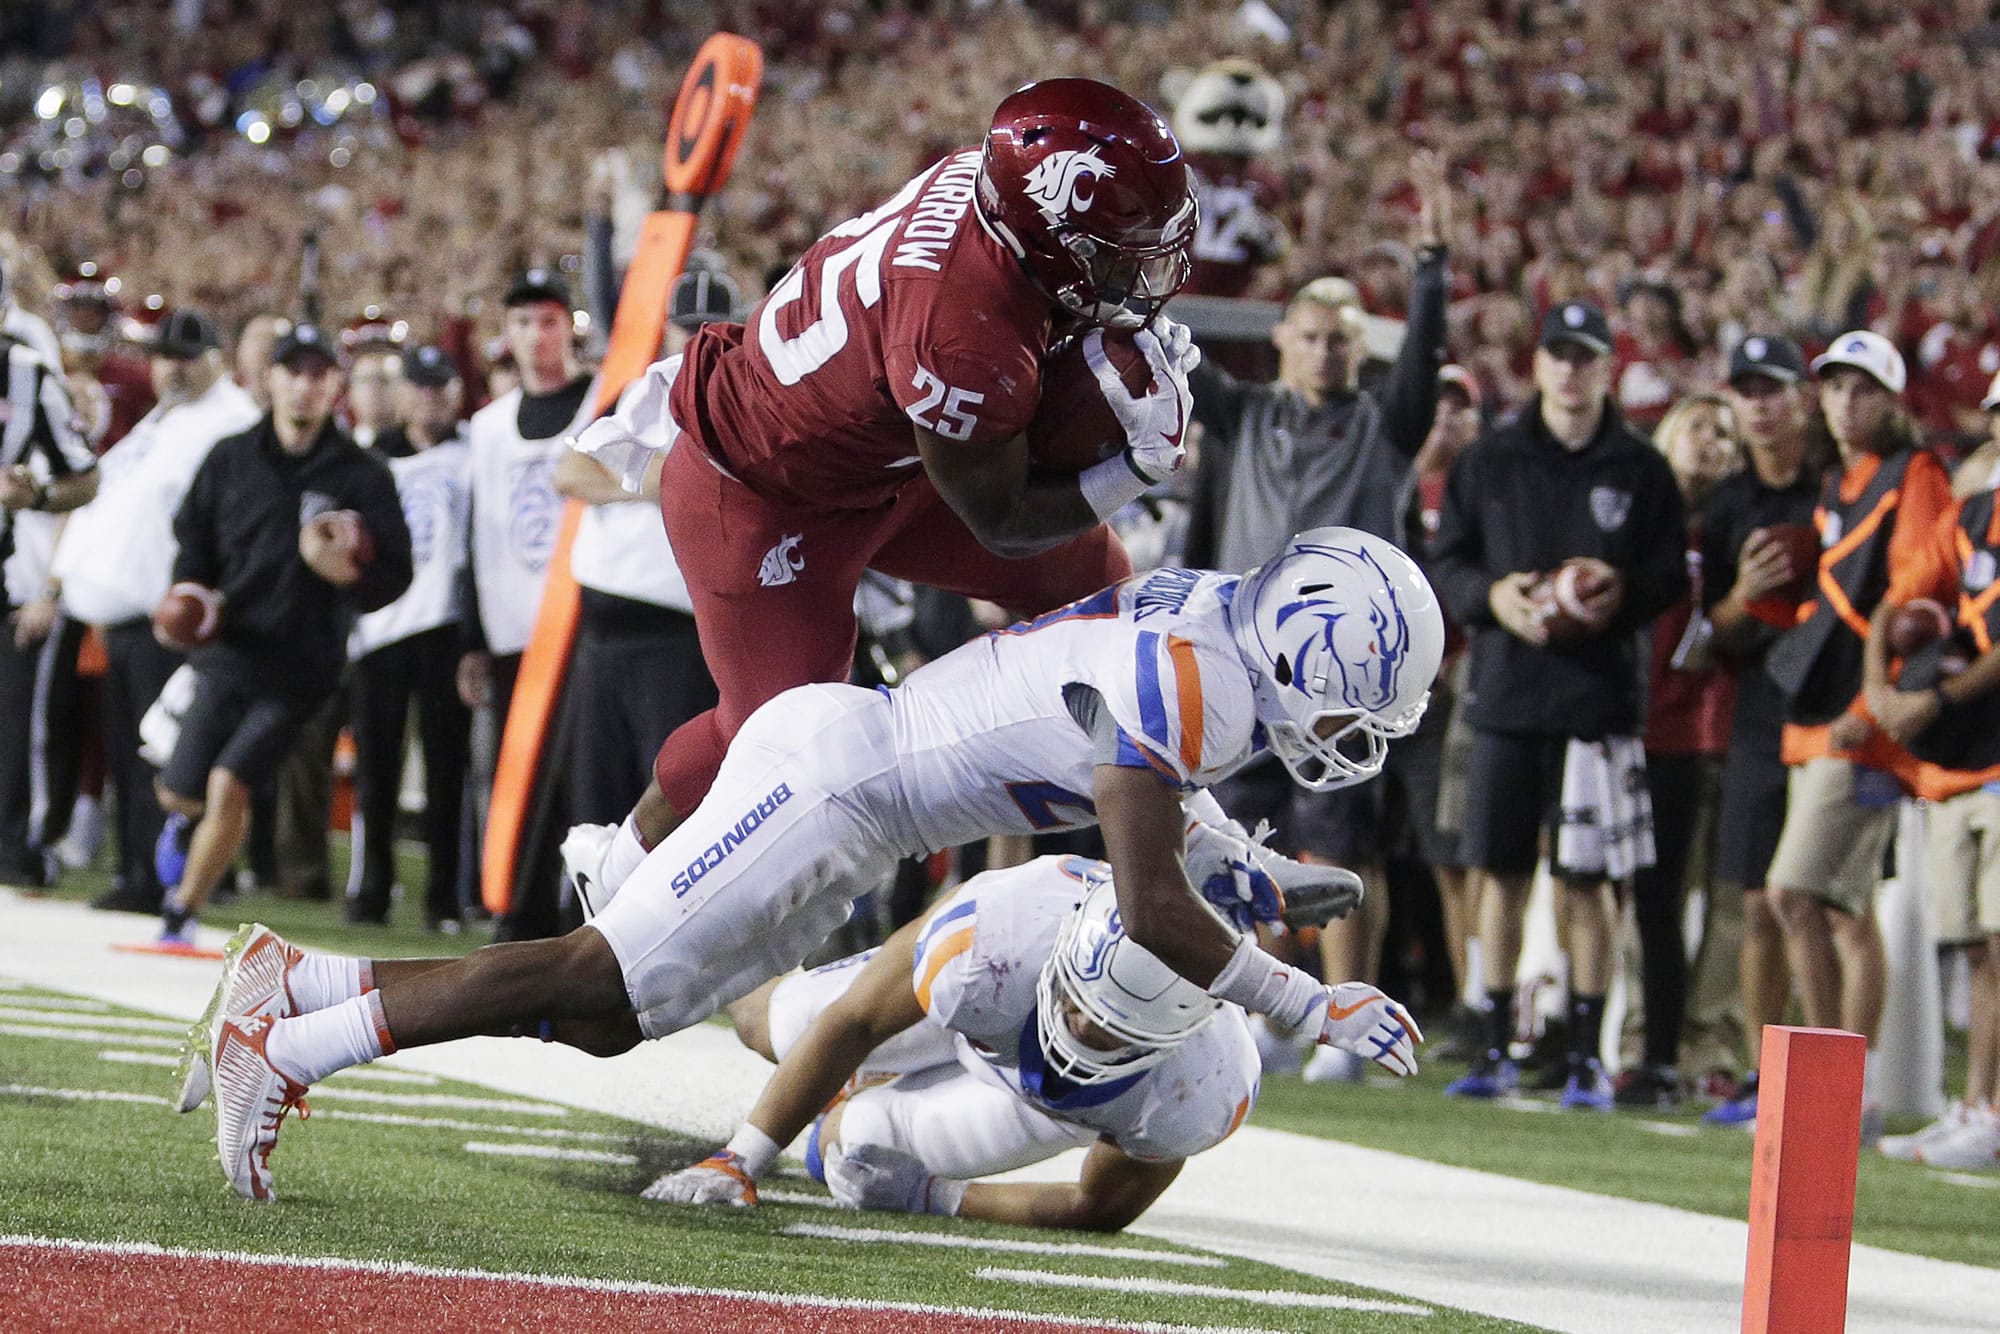 Washington State running back Jamal Morrow (25) dives for the game winning touchdown over Boise State cornerback Reid Harrison-Ducros, center, and linebacker Tyson Maeva during third overtime at Pullman, on Saturday, Sept. 9, 2017. Washington State won 47-44.